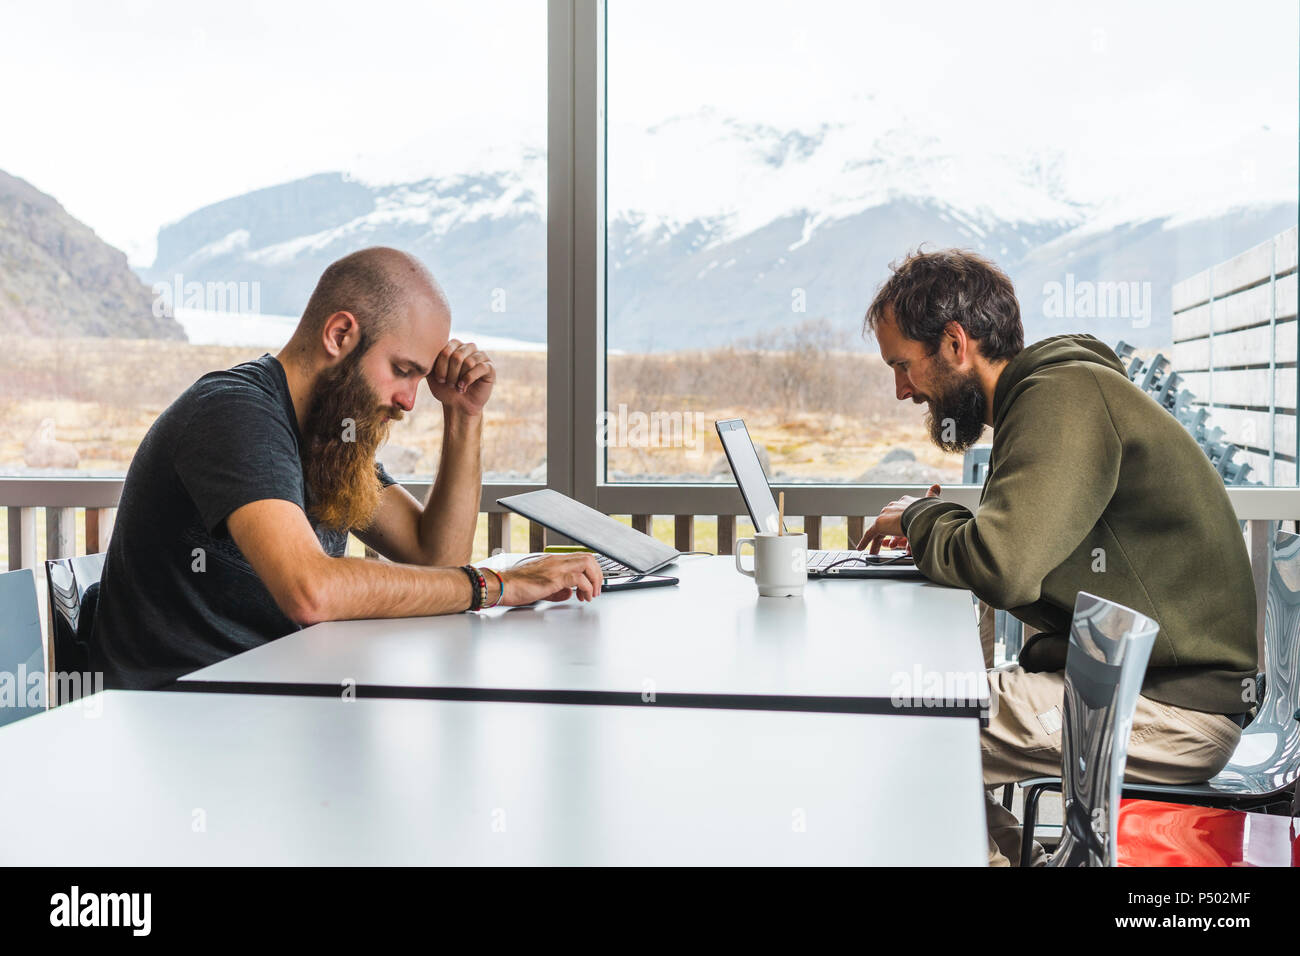 Island, two Hipsters sitting at table in a coffee shop Stock Photo